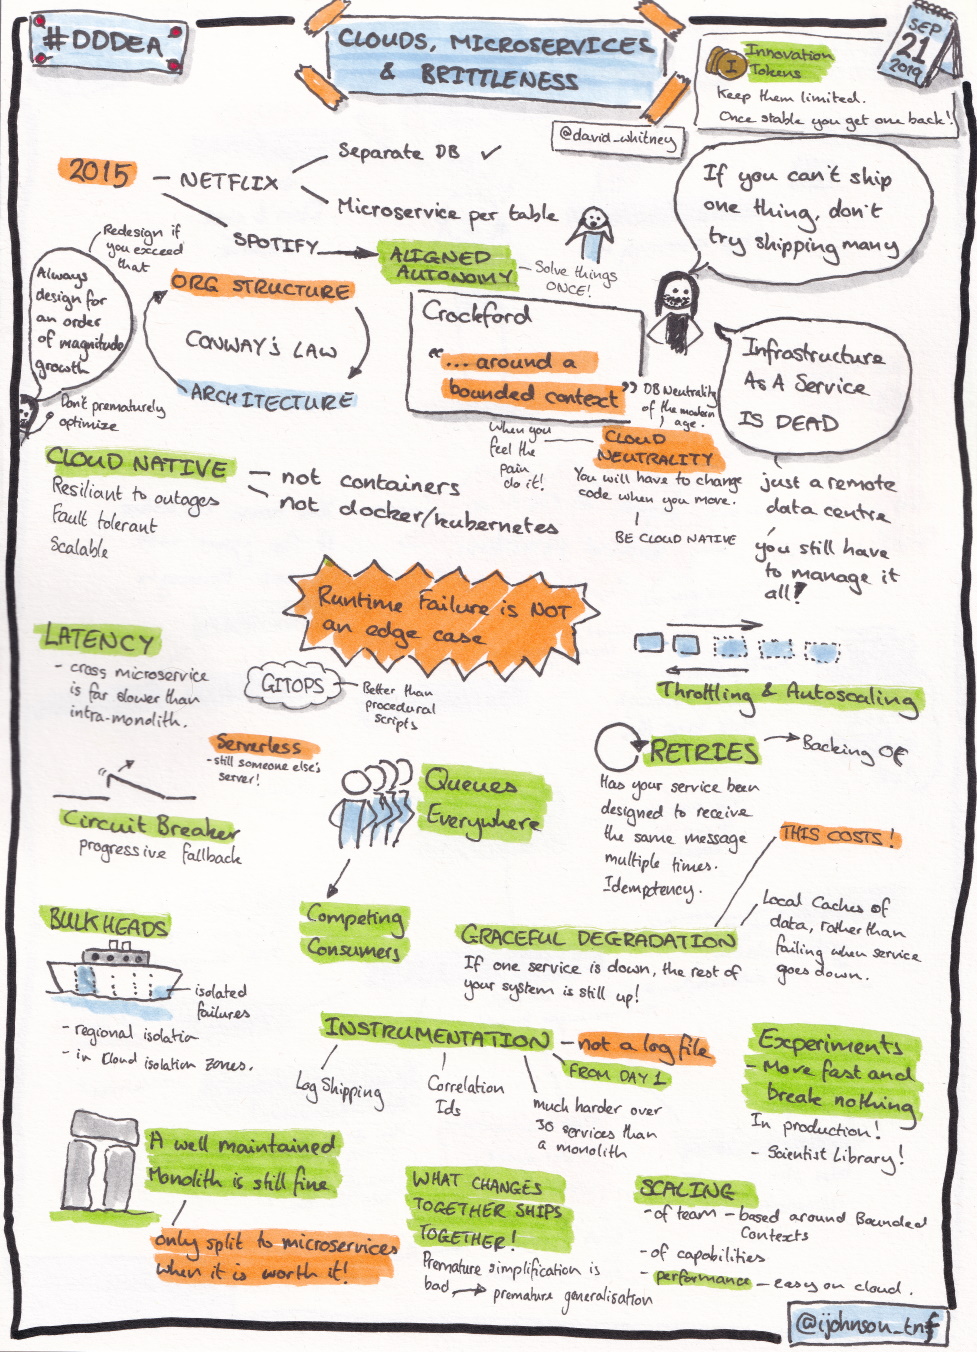 Sketchnotes from the talk 'Clouds, microservices and brittleness' by David Whitney